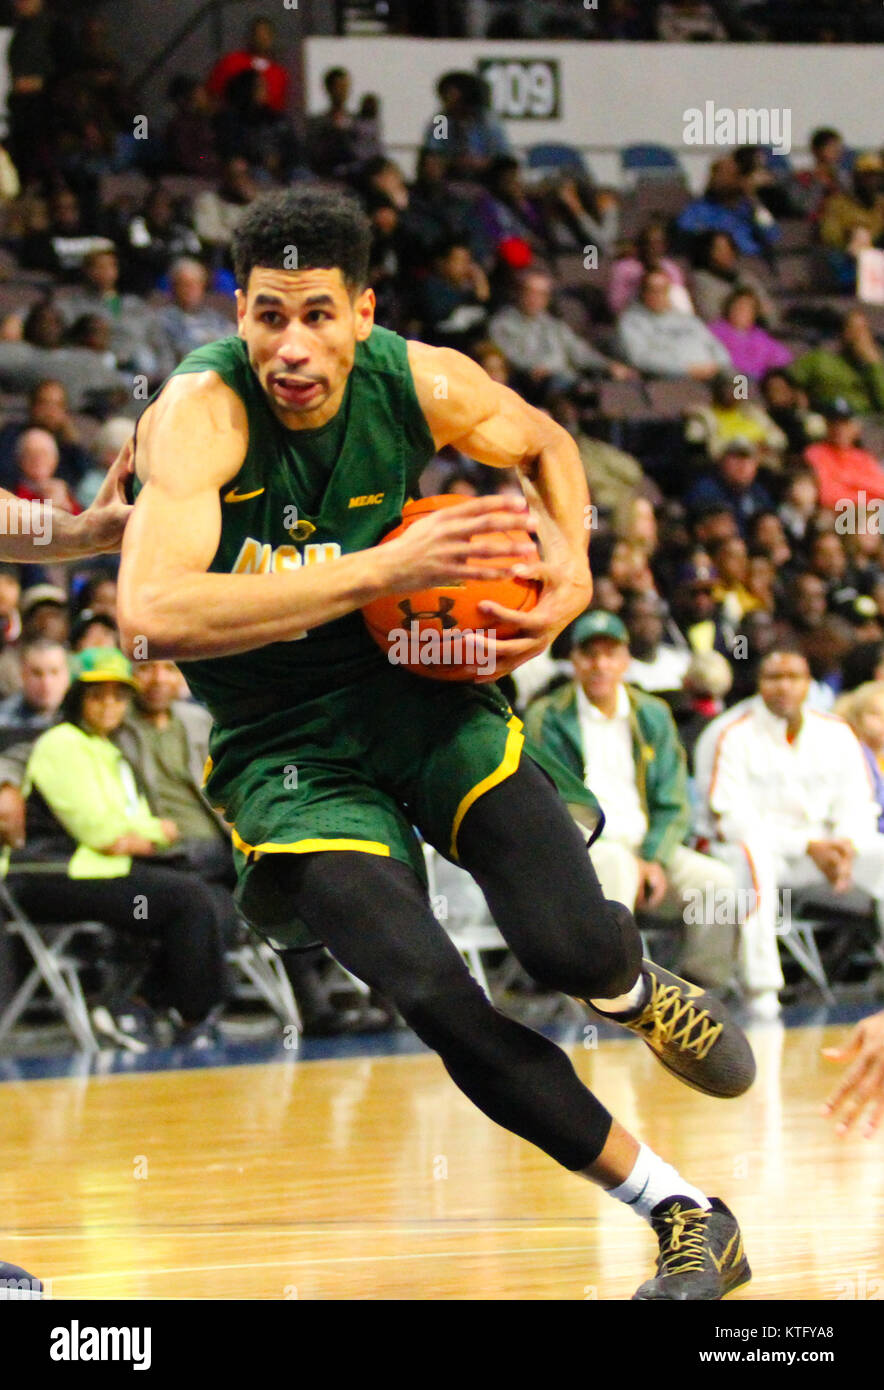 December 23, 2017 - Norfolk State Spartans guard Preston Bungei (1) with the ball during the Norfolk State Spartans vs Old Dominion Monarchs game at the Norfolk Scope in Norfolk, Va. Old Dominion beat Norfolk State 61-50. Jen Hadsell/CSM Stock Photo